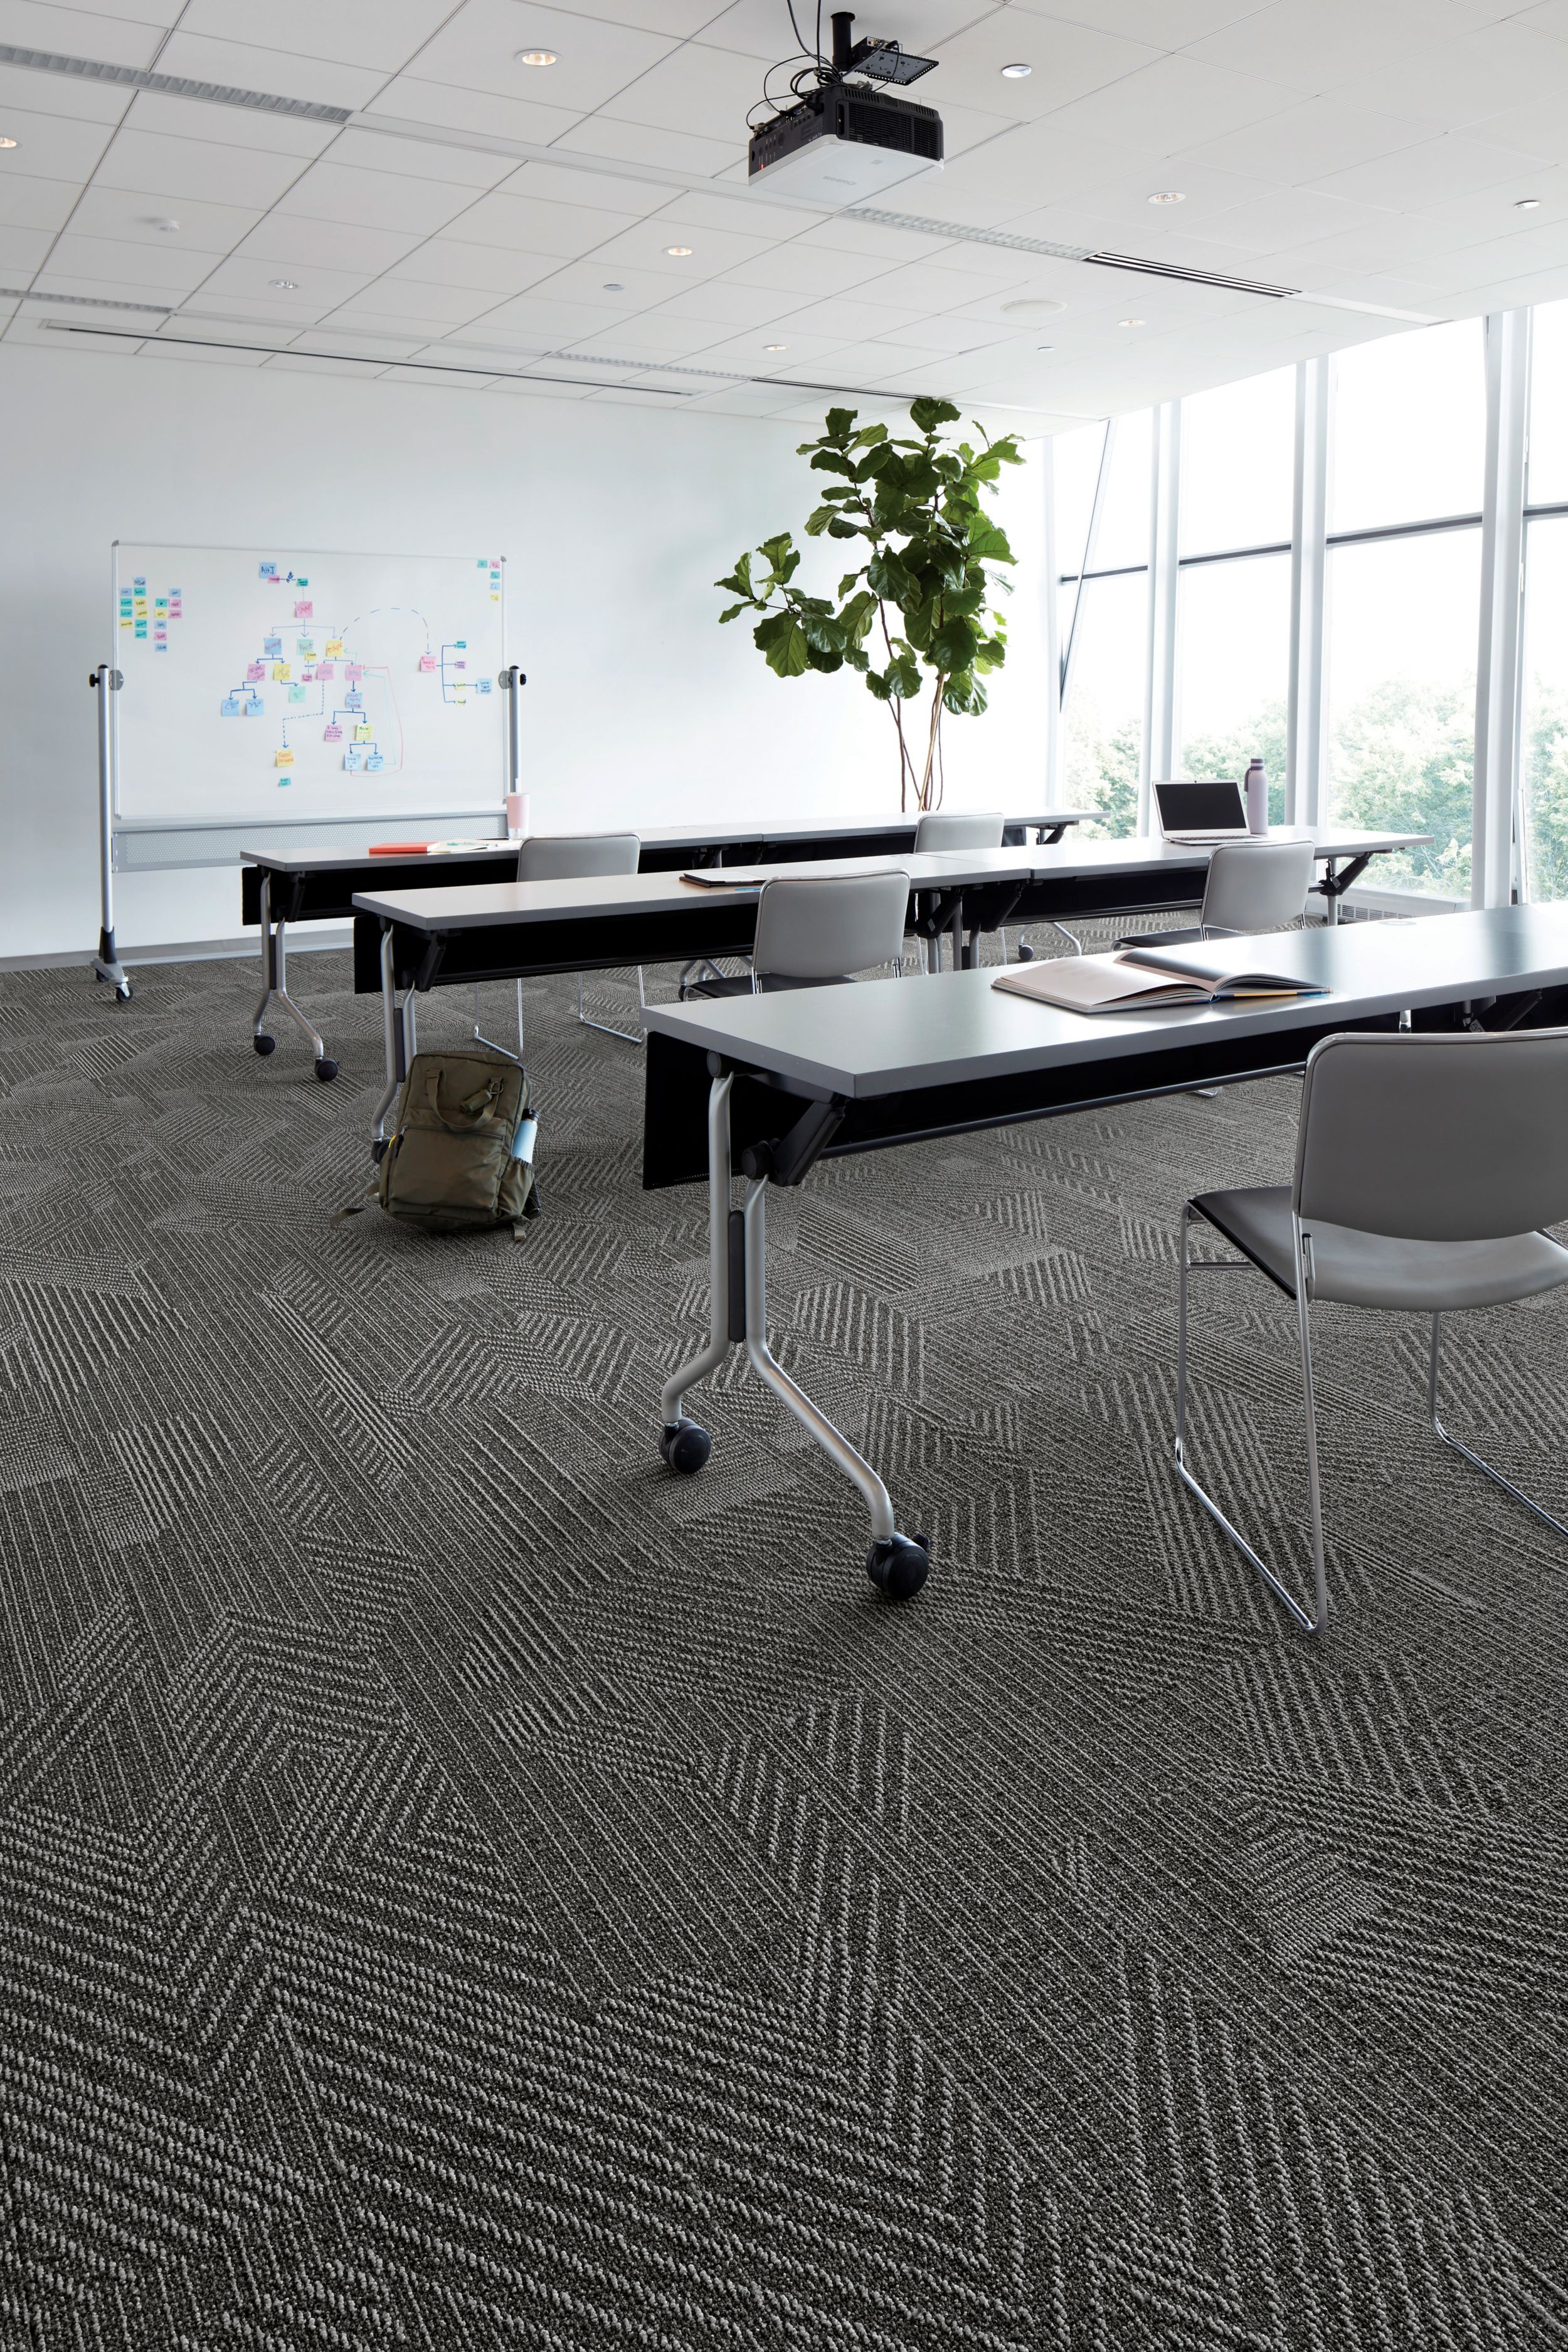 Interface Play the Angle plank carpet tile in college classroom imagen número 1